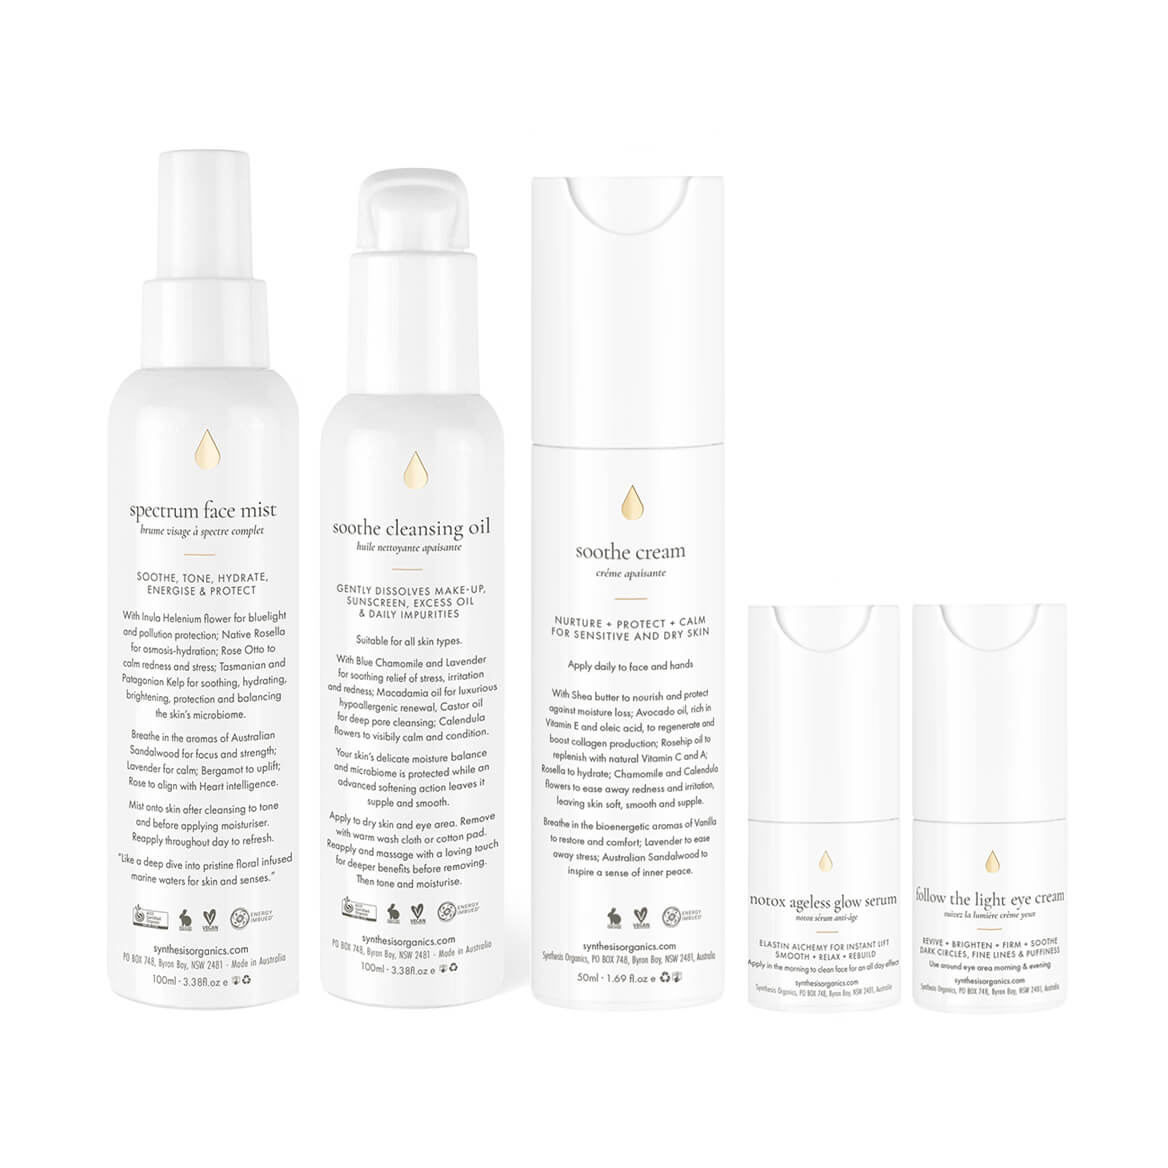 Collection 2: Essentials PLUS Other Synthesis Organics With Notox Ageless Glow Serum